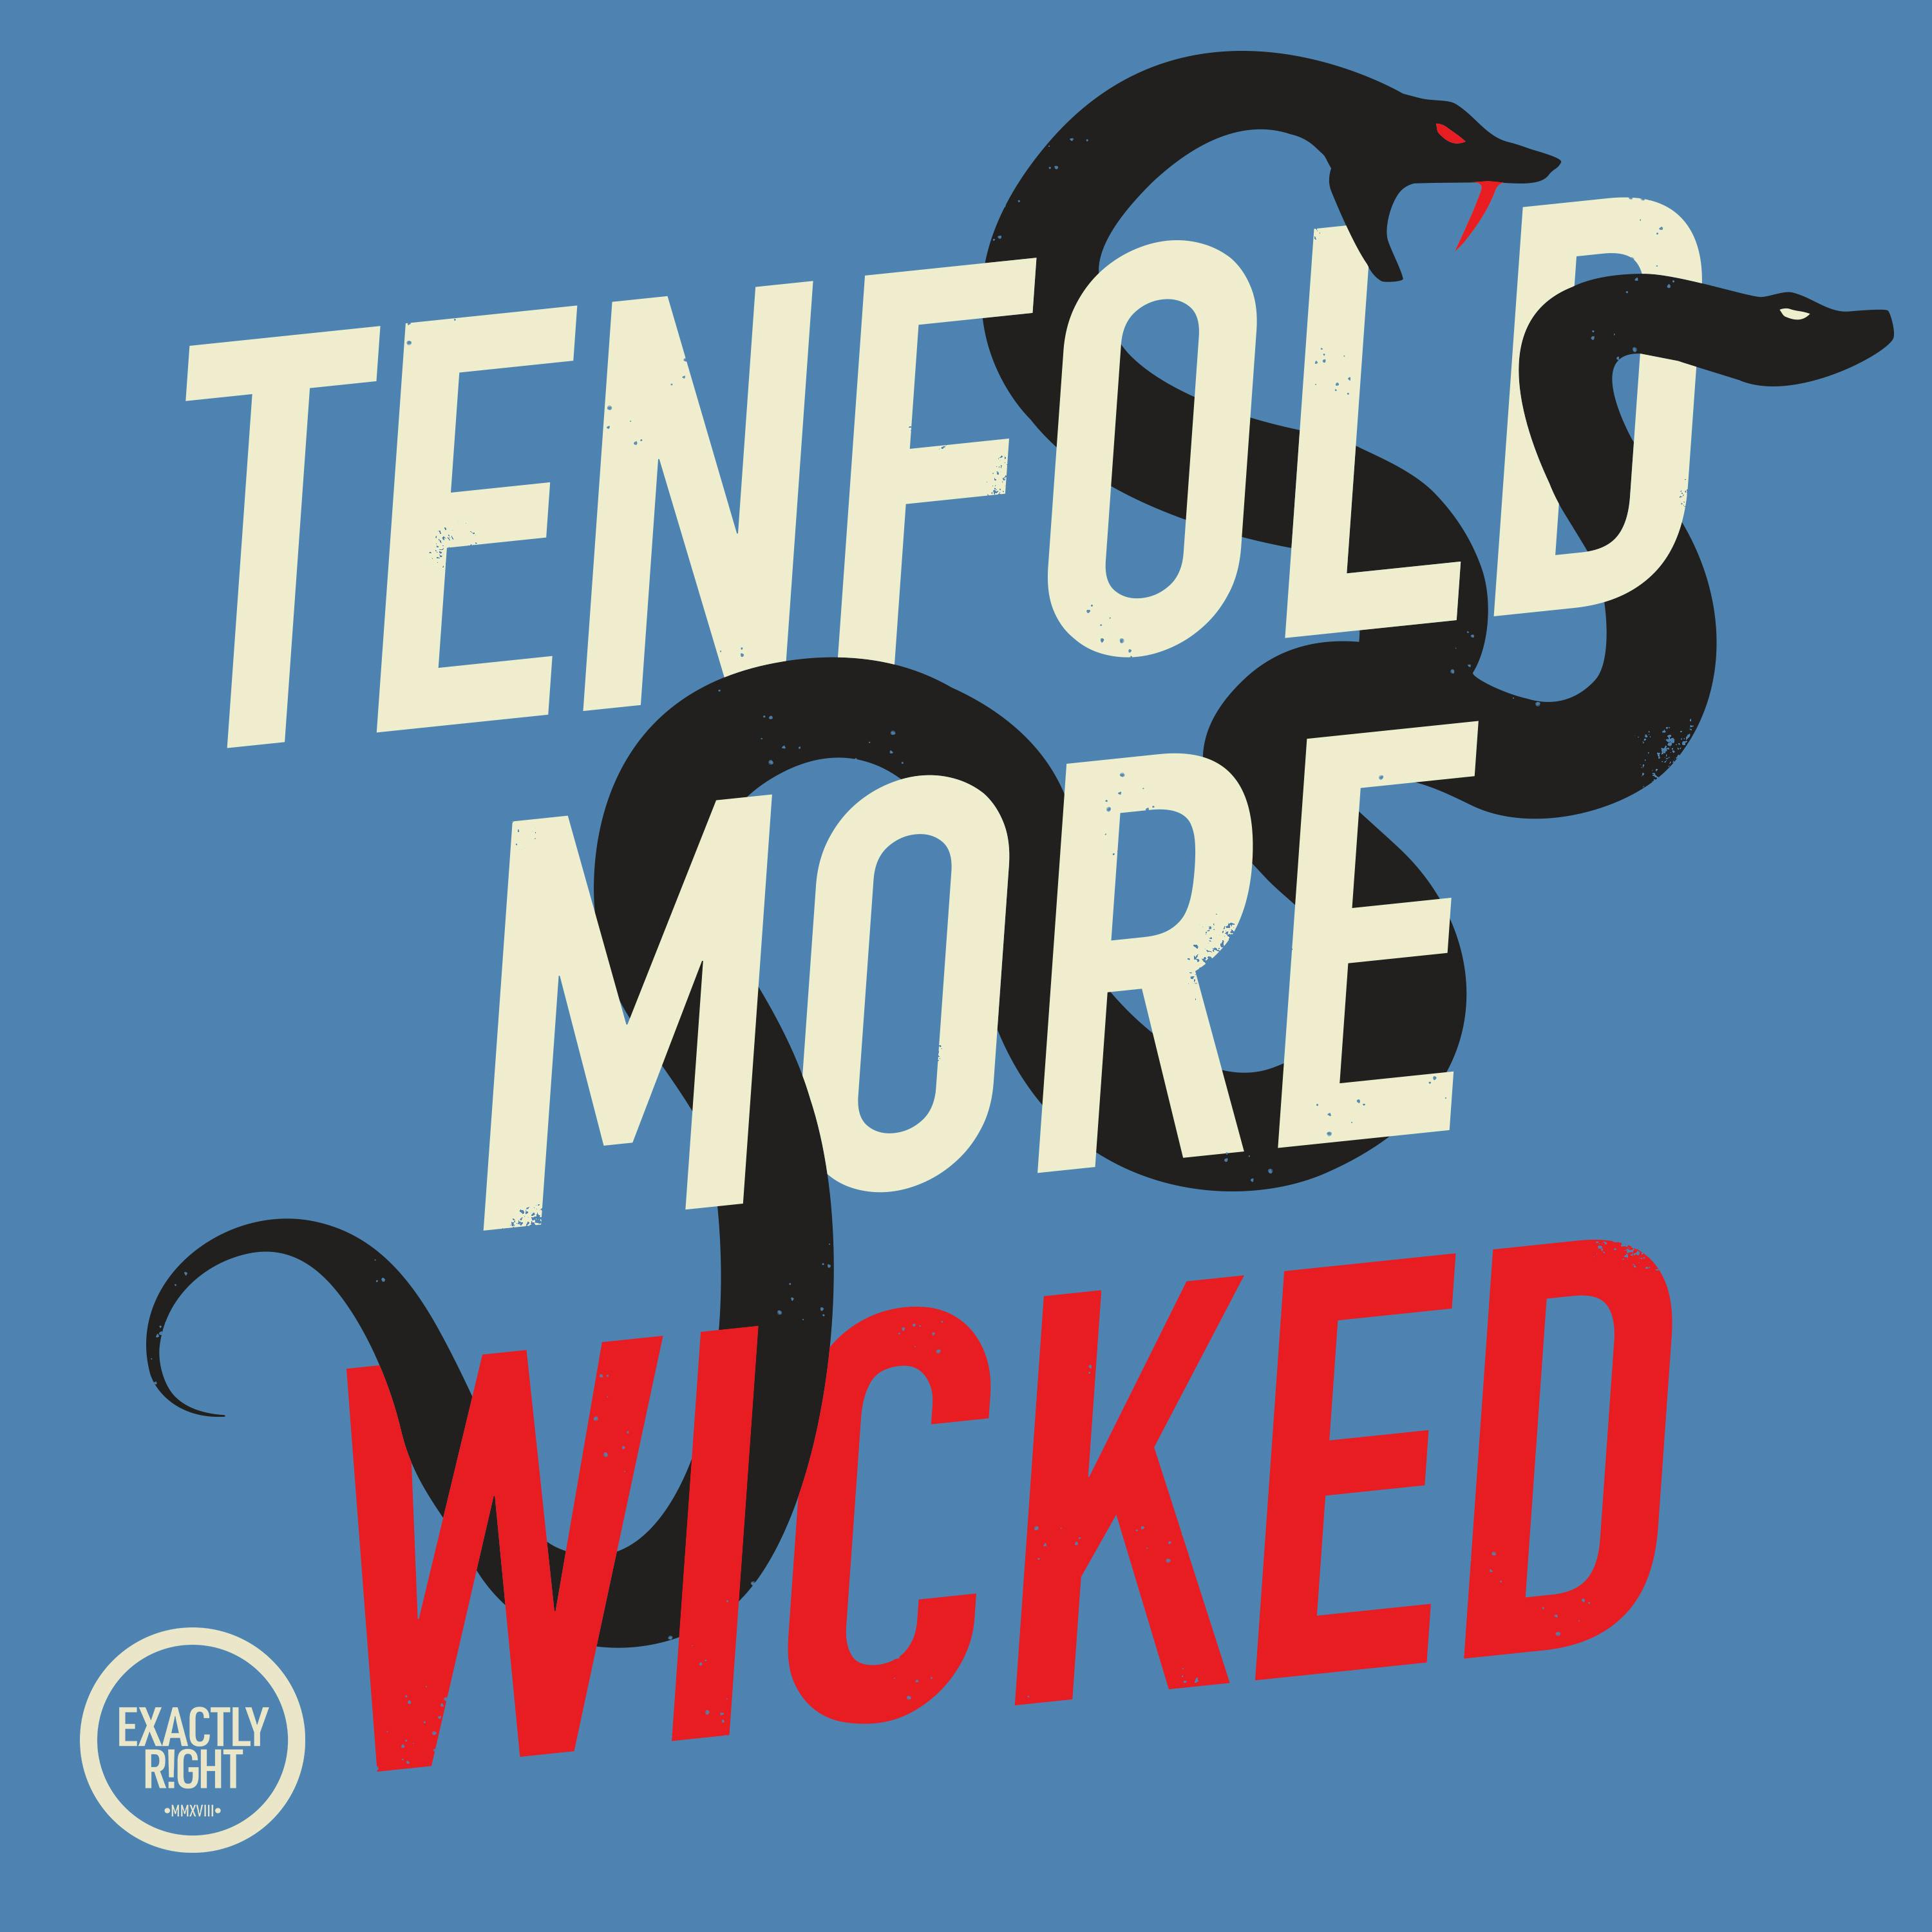 Tenfold More Wicked - A Blessing and a Curse: …Took an Ax